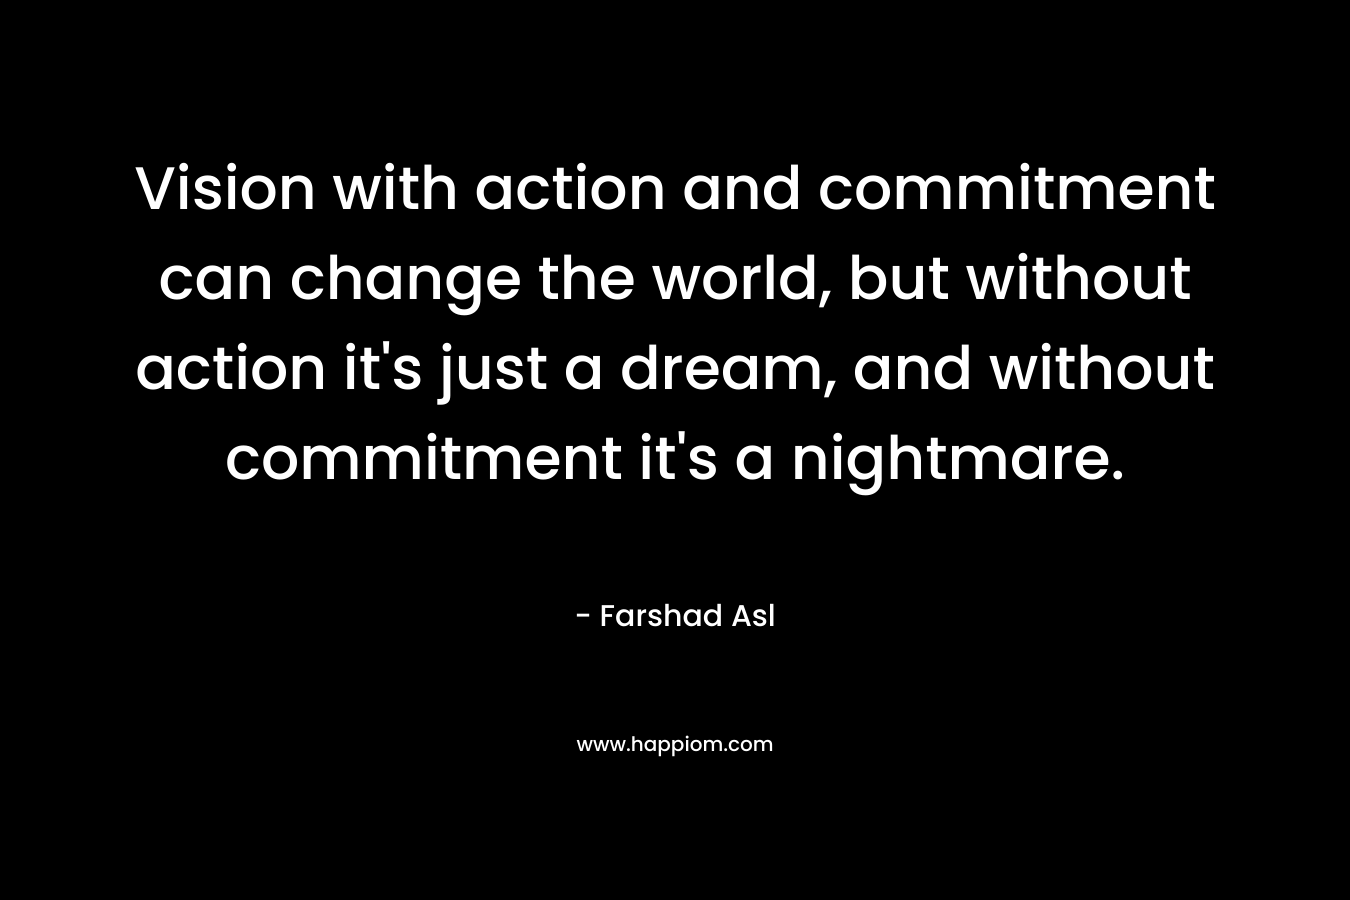 Vision with action and commitment can change the world, but without action it's just a dream, and without commitment it's a nightmare.